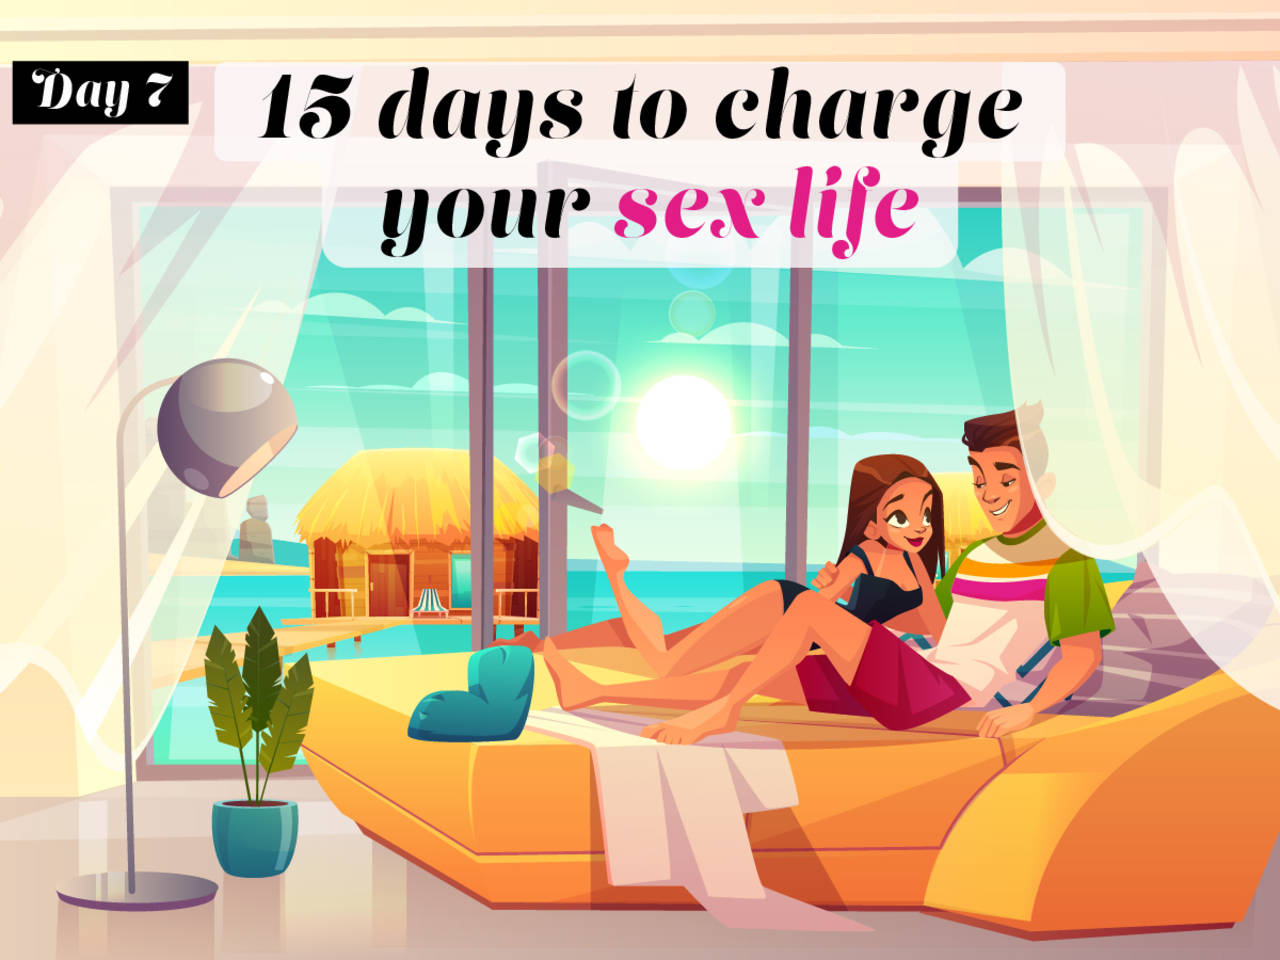 15 days to spice up your sex life in 2020 Blindfold and put on a little show (tip no photo